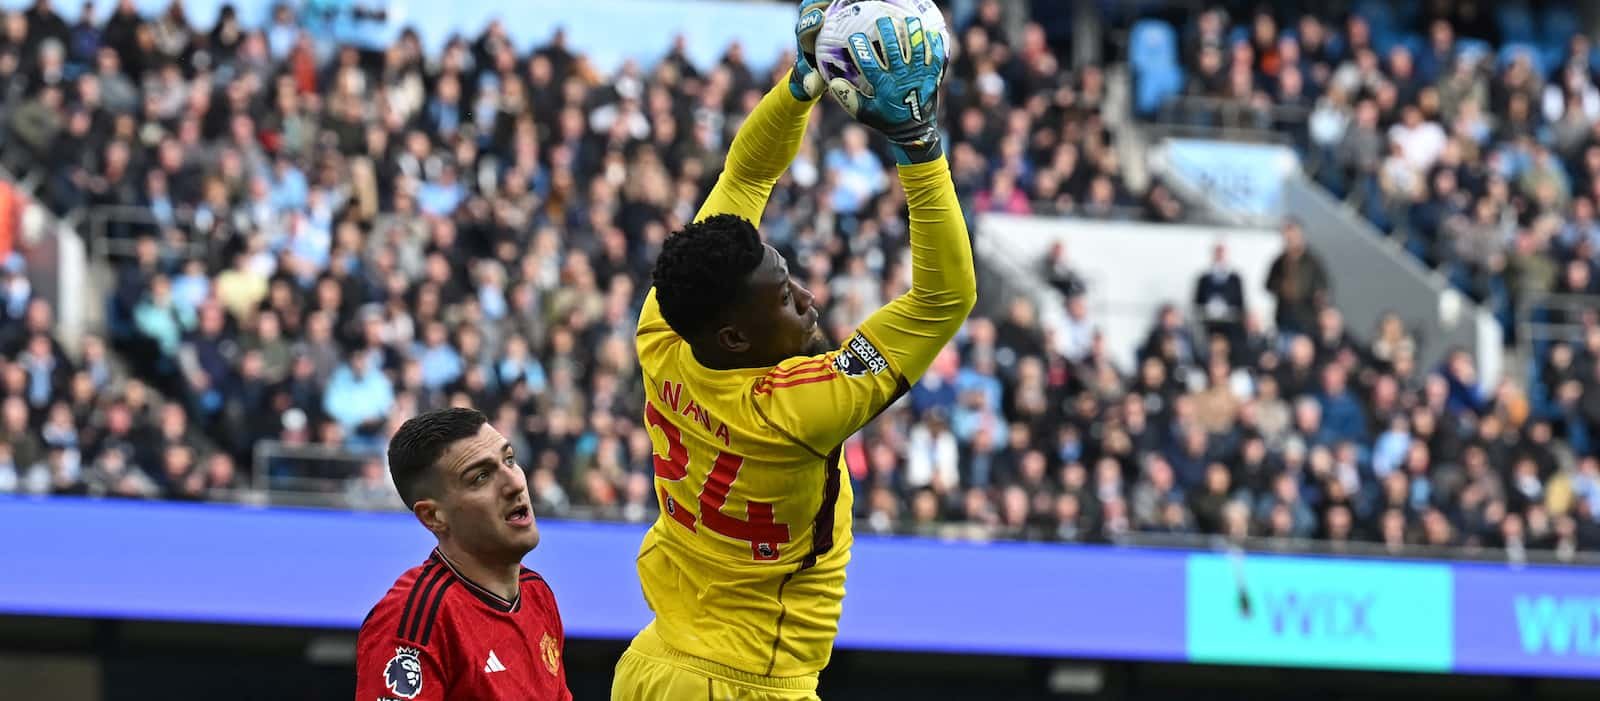 Andre Onana was the silver lining in shambolic 3-1 loss to Manchester City  - Man United News And Transfer News | The Peoples Person